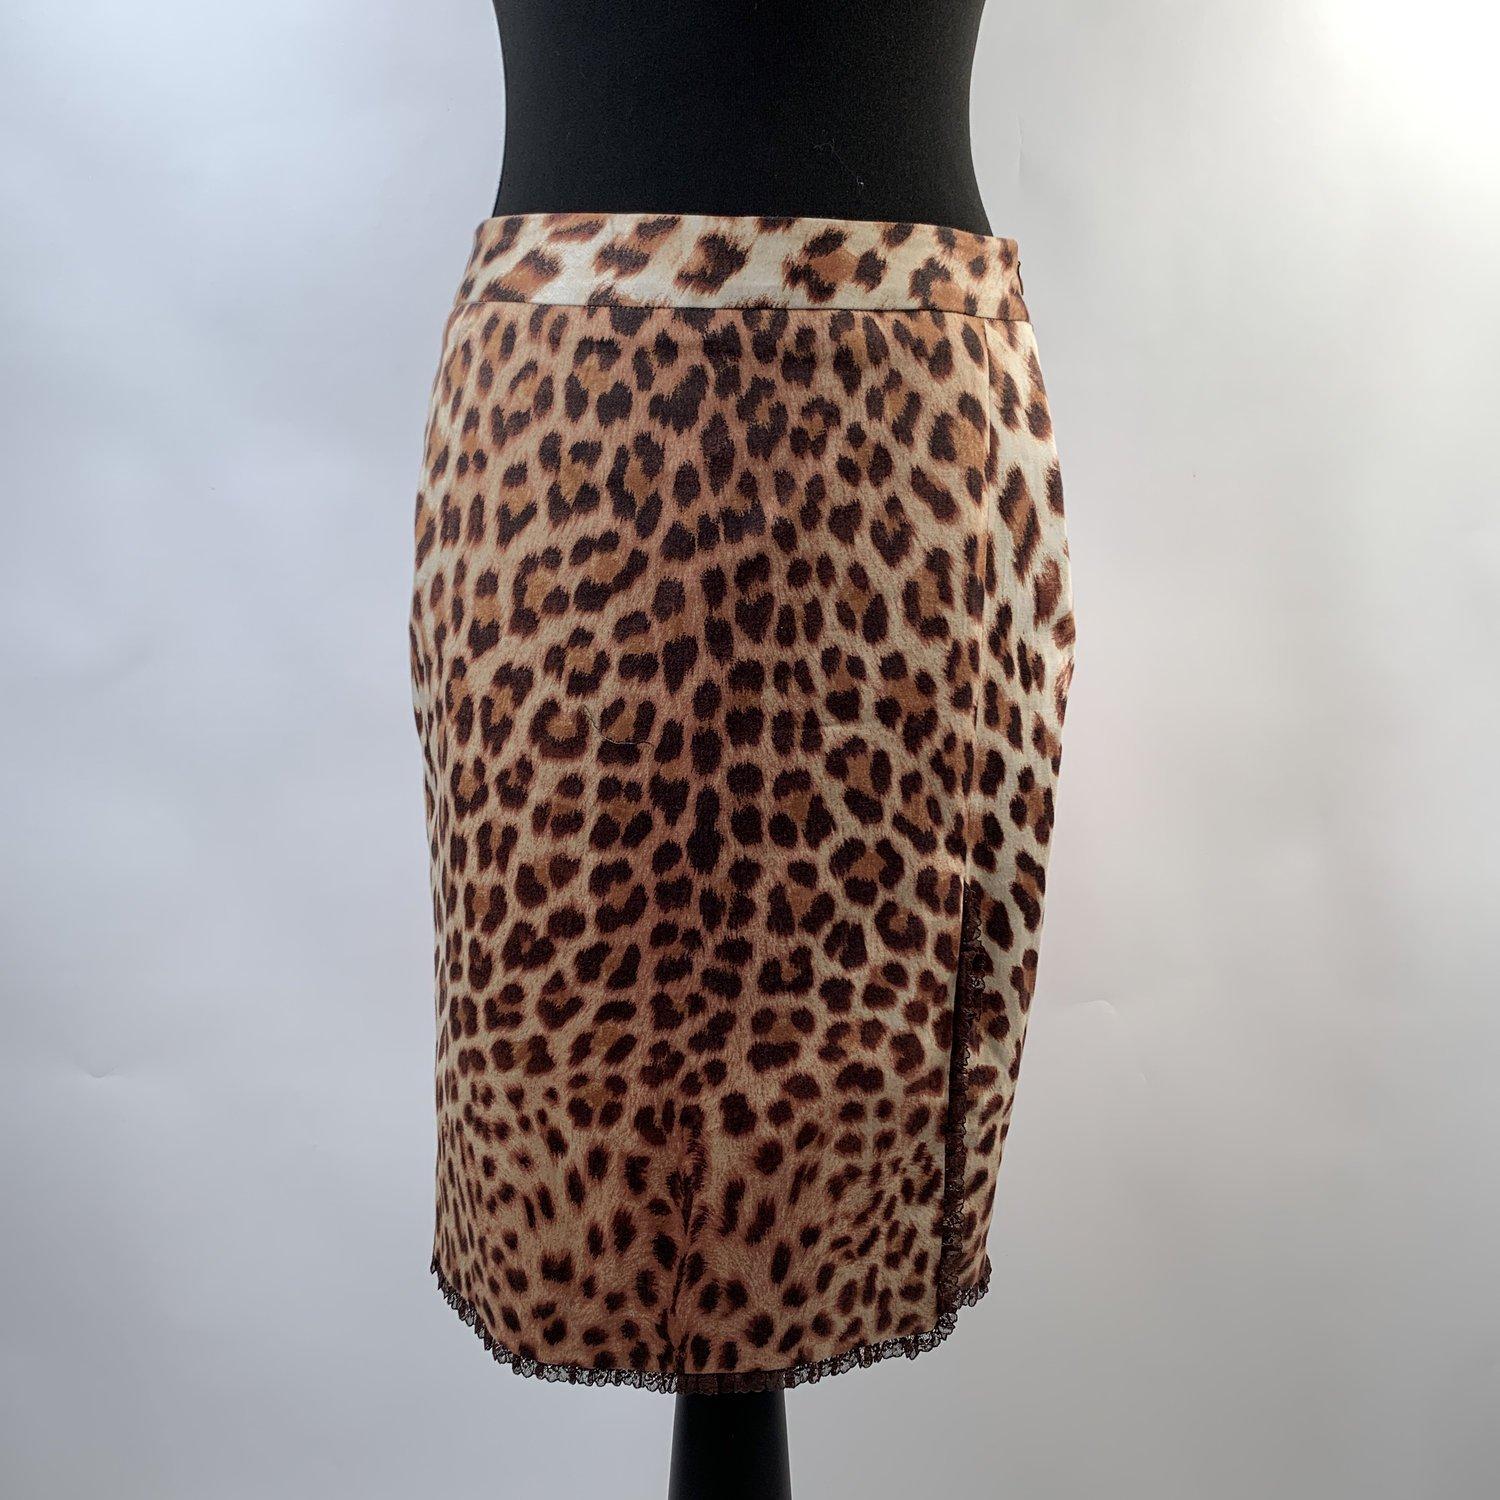 MATERIAL: N/A COLOR: Beige MODEL: Pencil Skirt GENDER: Women SIZE: Small COUNTRY OF MANUFACTURE: Italy Condition CONDITION DETAILS: A :EXCELLENT CONDITION - Used once or twice. Looks mint. Imperceptible signs of wear may be present due to storage